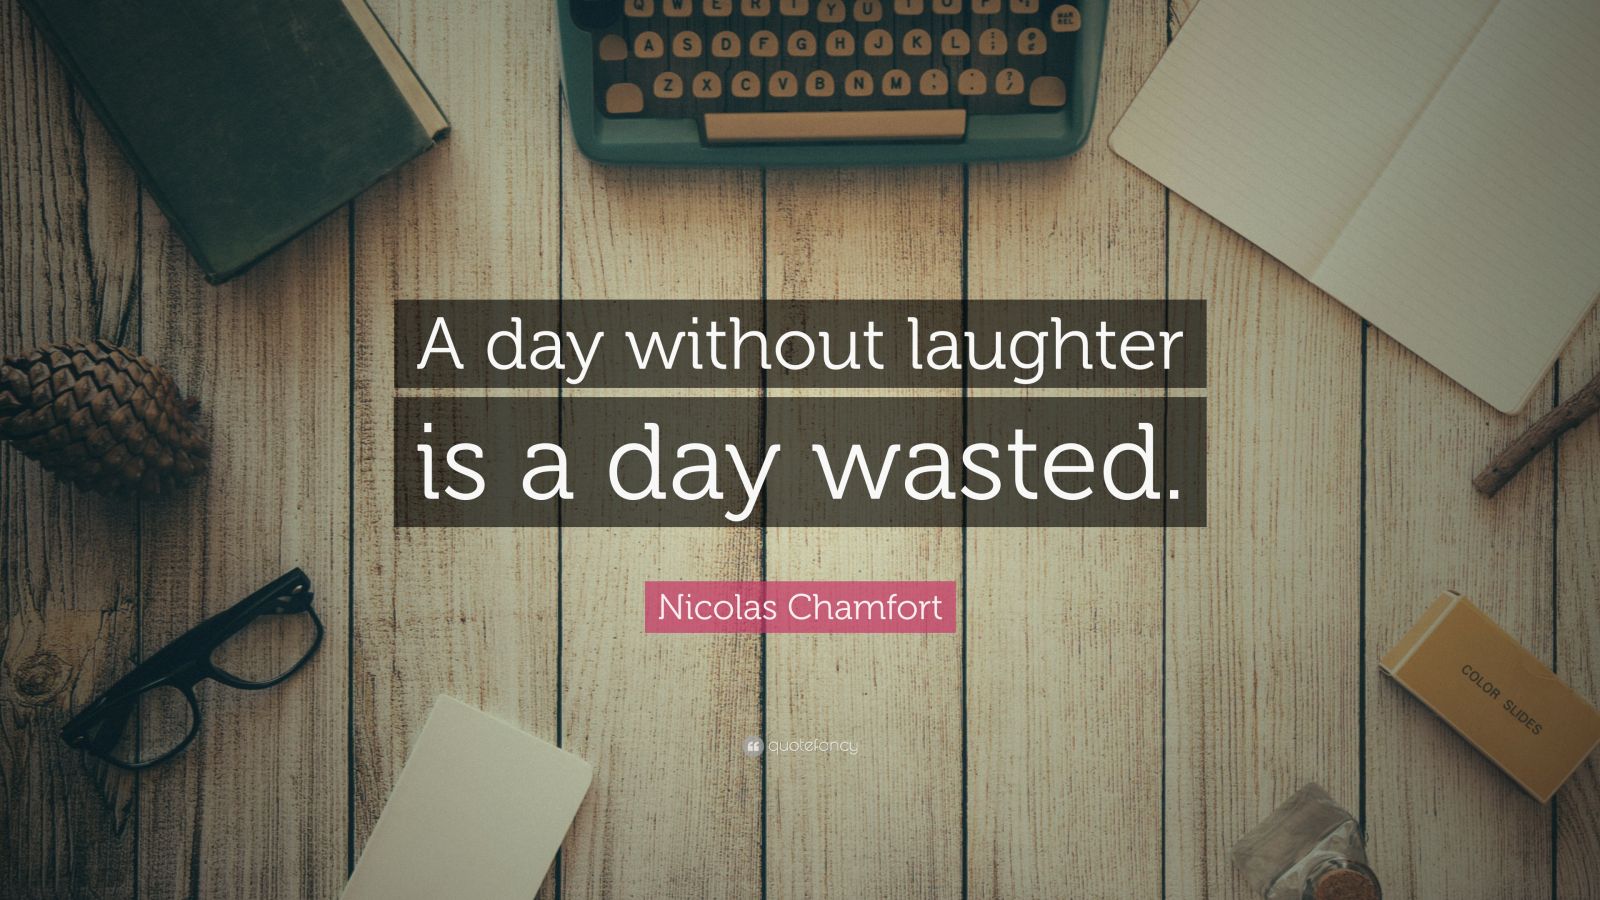 nicolas-chamfort-quote-a-day-without-laughter-is-a-day-wasted-12